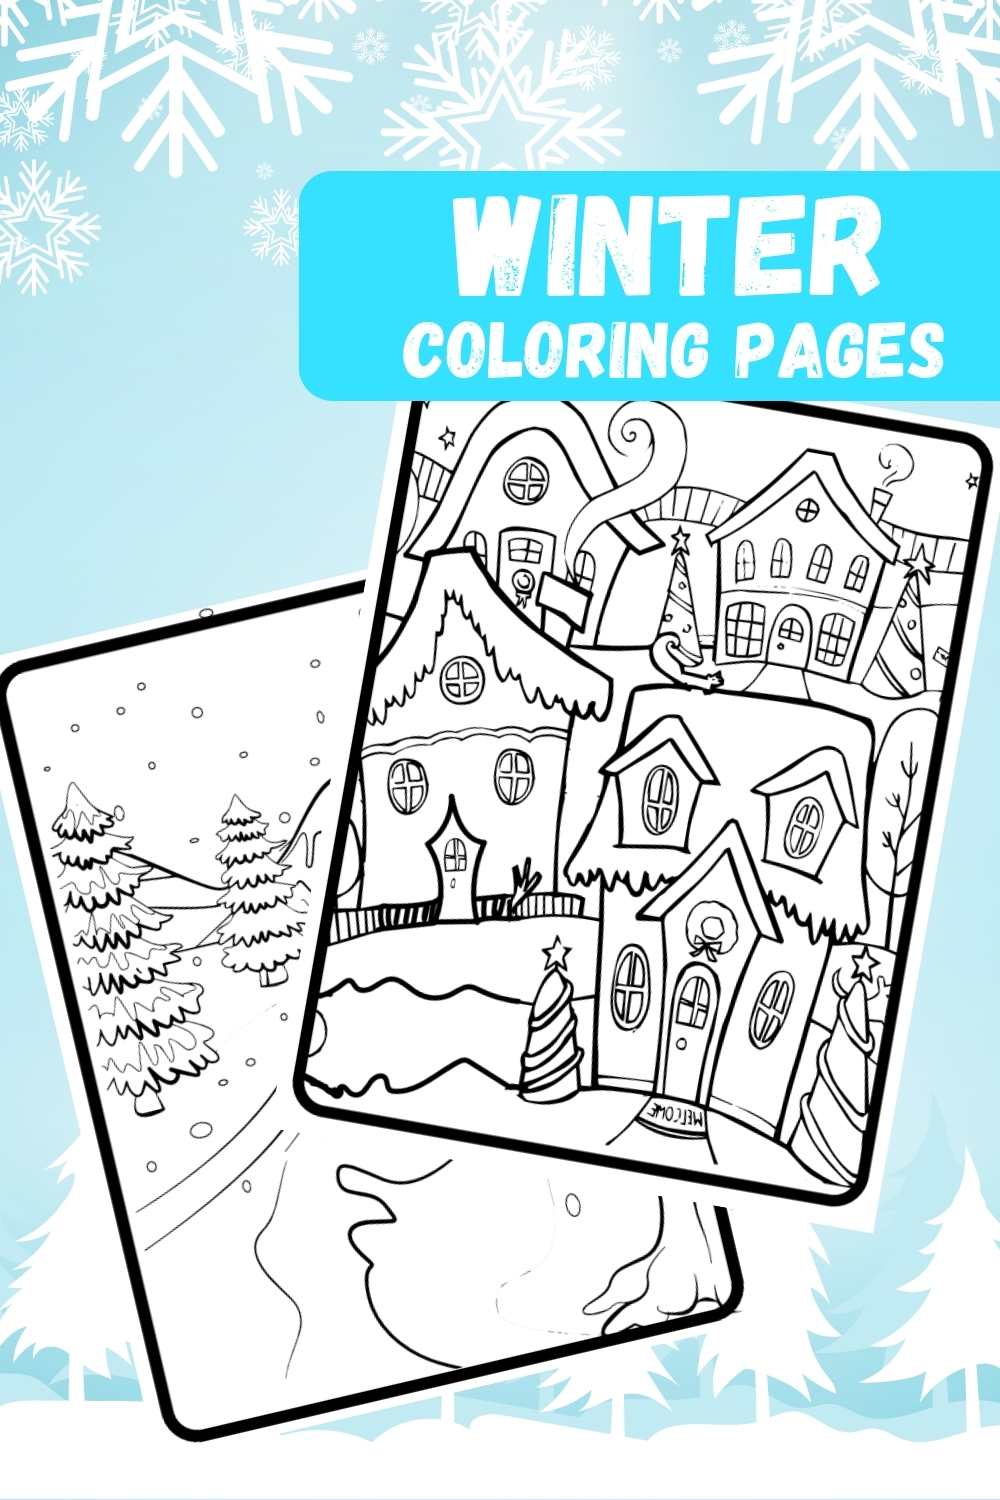 Winter Coloring Pages - pinterest image preview.